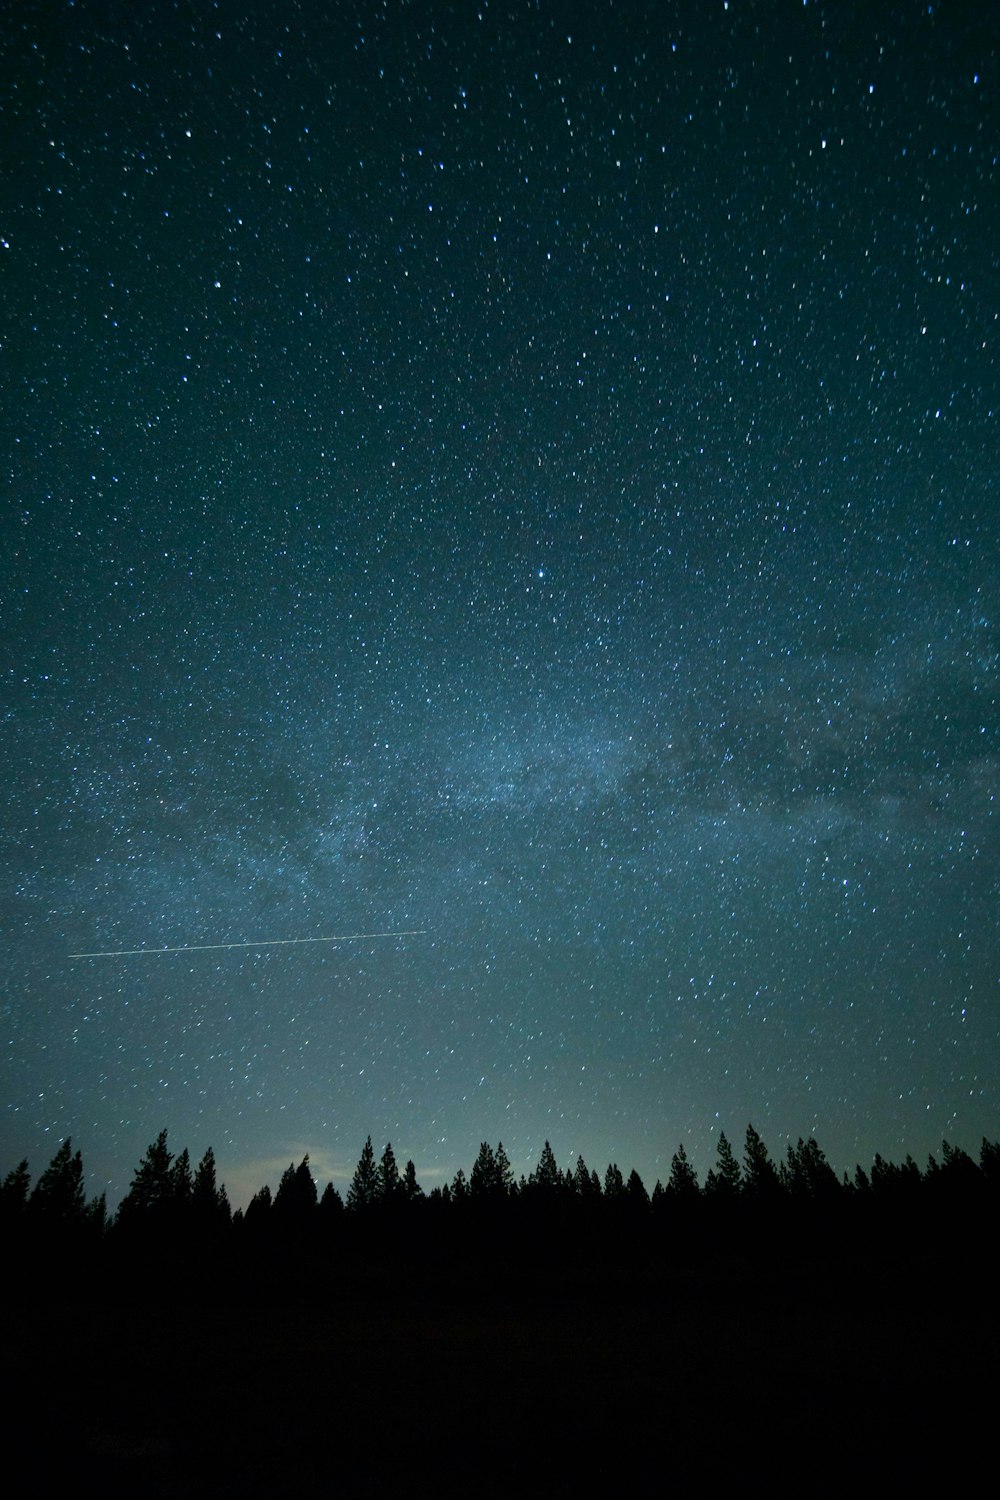 Explore the Night Sky with Background Sky Night Images from Around the World